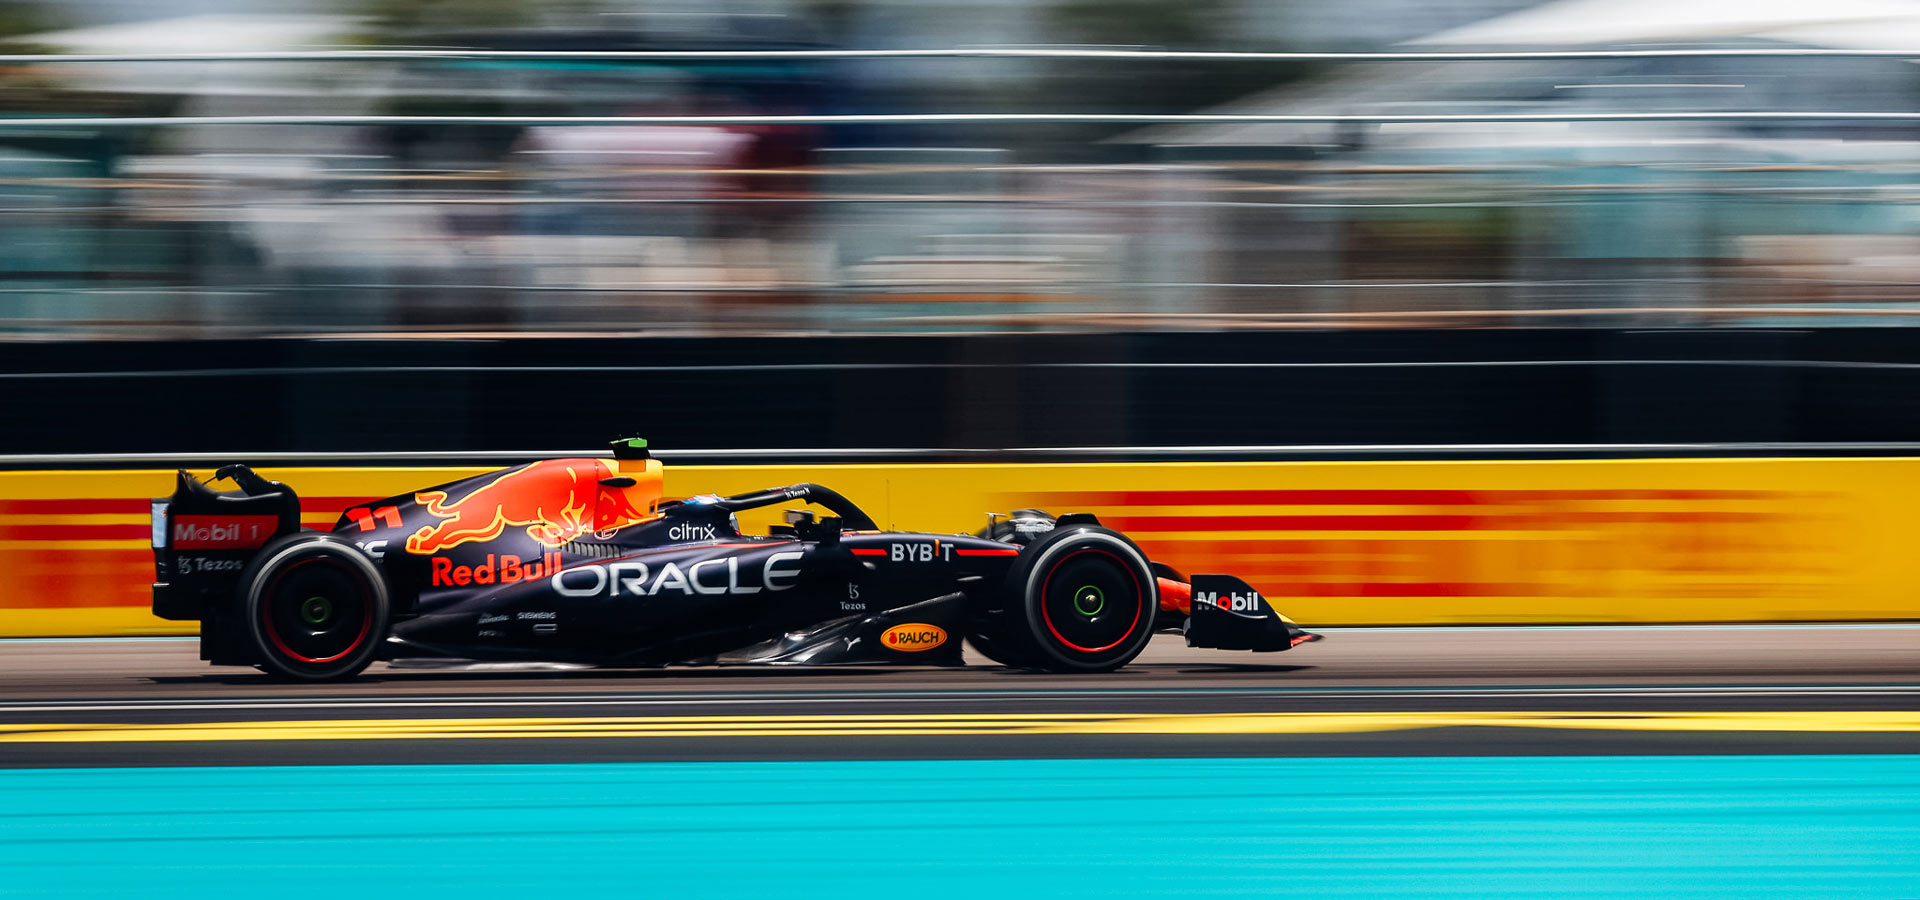 How To Watch The F1 Miami Grand Prix Without Cable